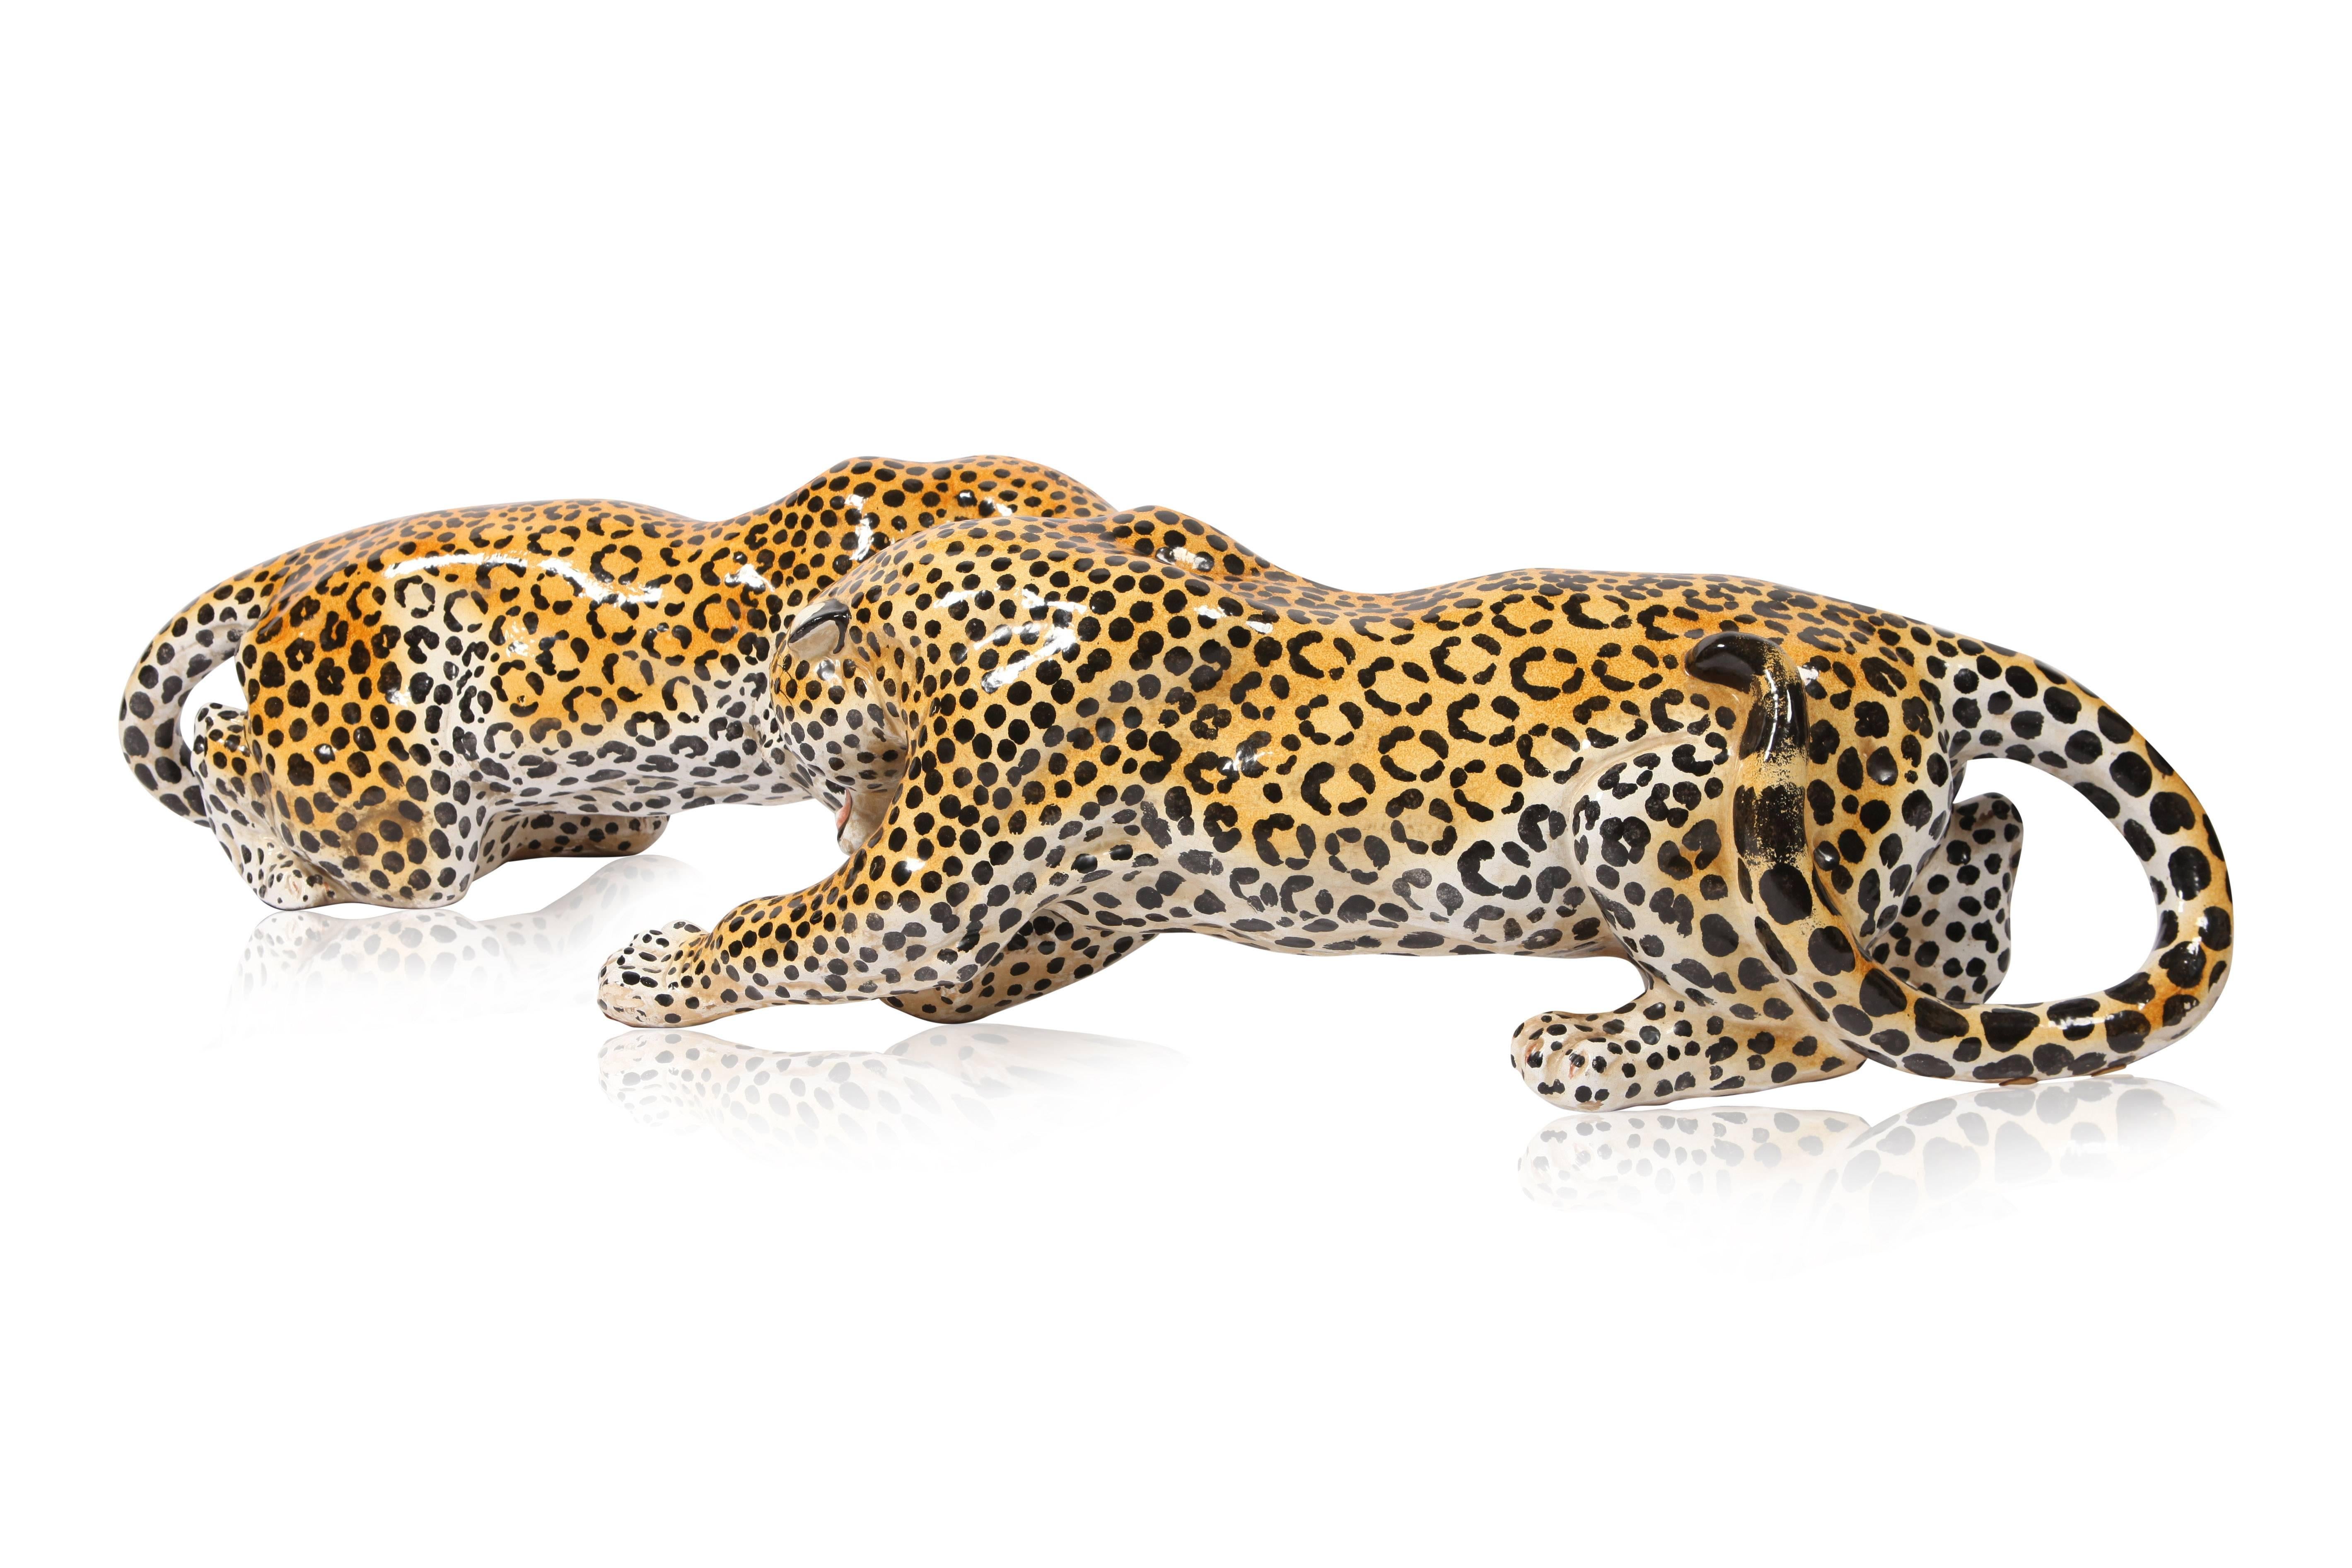 Hand-painted 1960s leopard sculptures,
Italy.
An identical set in perfect condition.

 